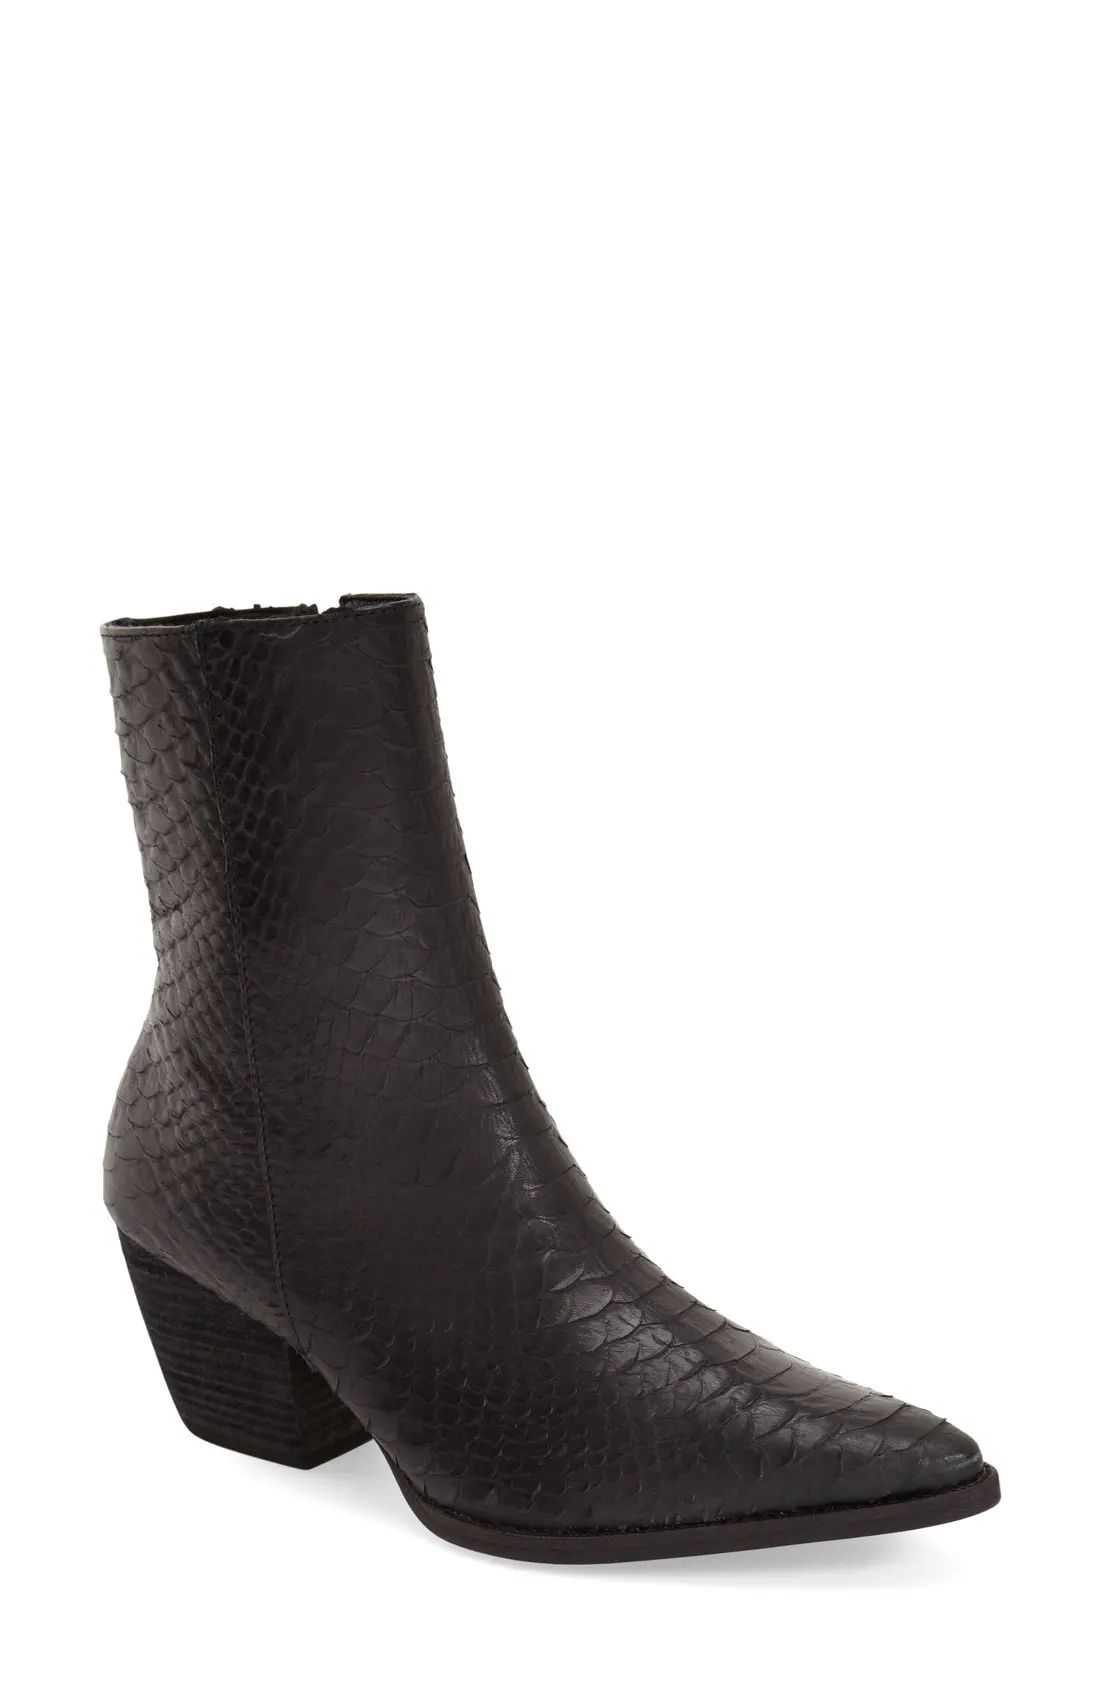 Matisse Caty Western Pointed Toe Bootie in Black Croc Embossed Leather at Nordstrom, Size 8 | Nordstrom